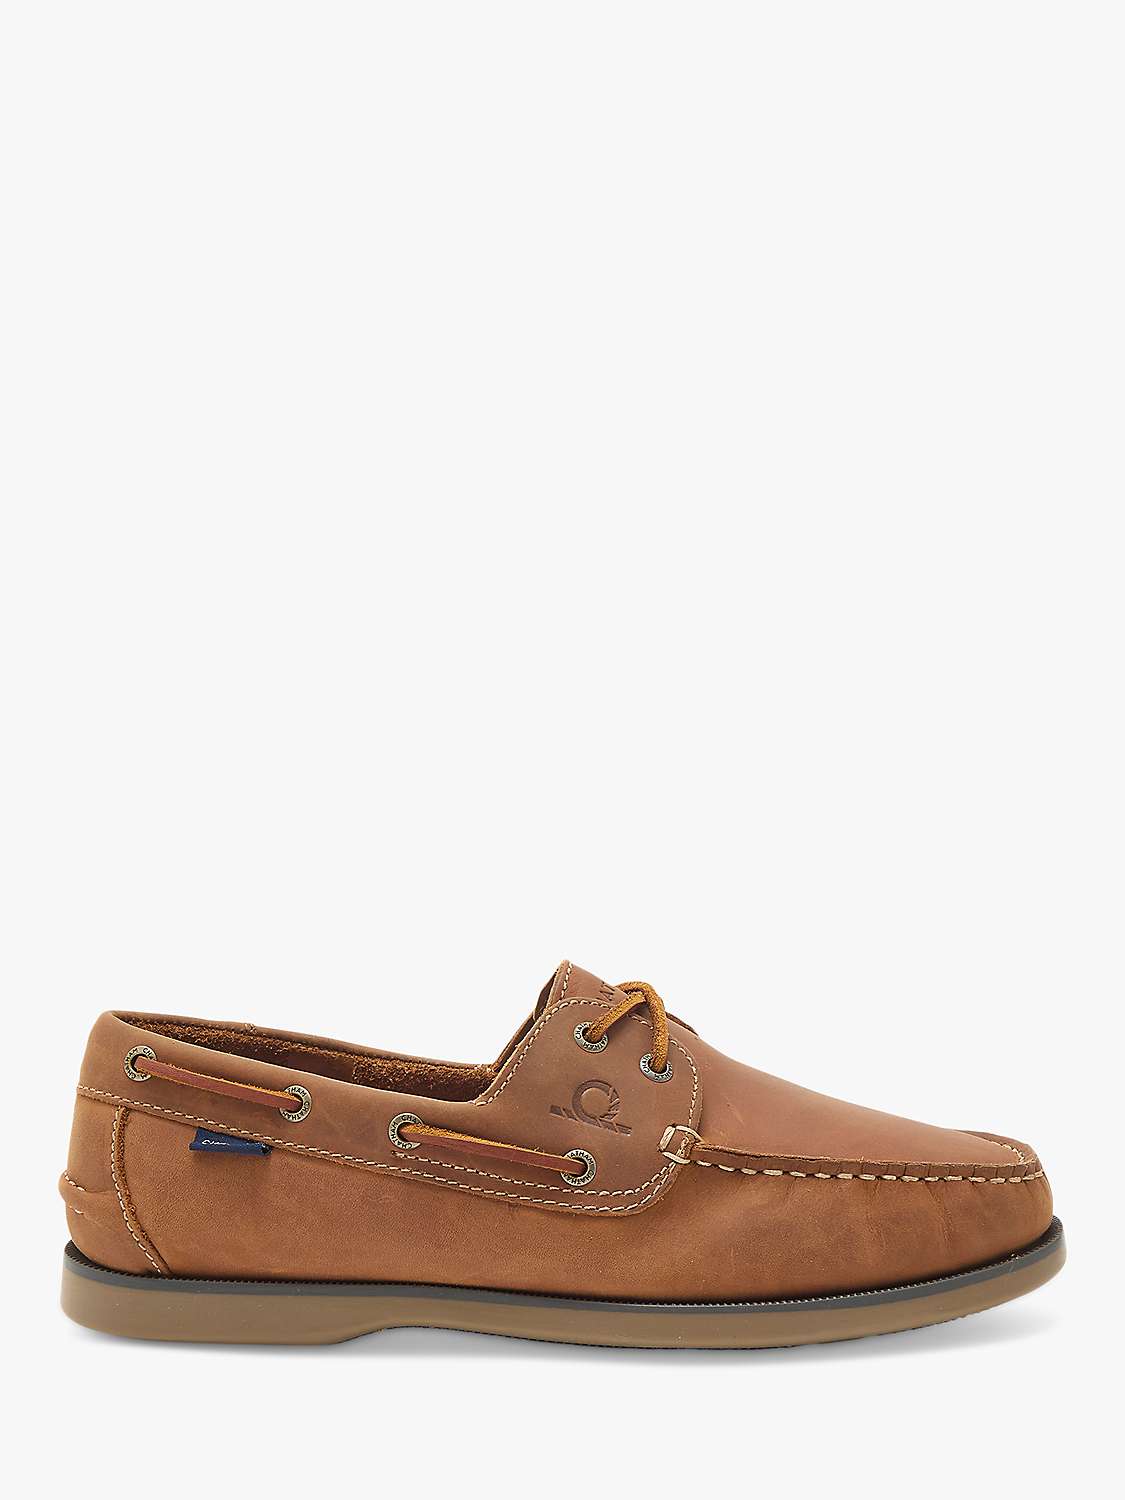 Buy Chatham Whitstable Leather Boat Shoes, Tan Online at johnlewis.com